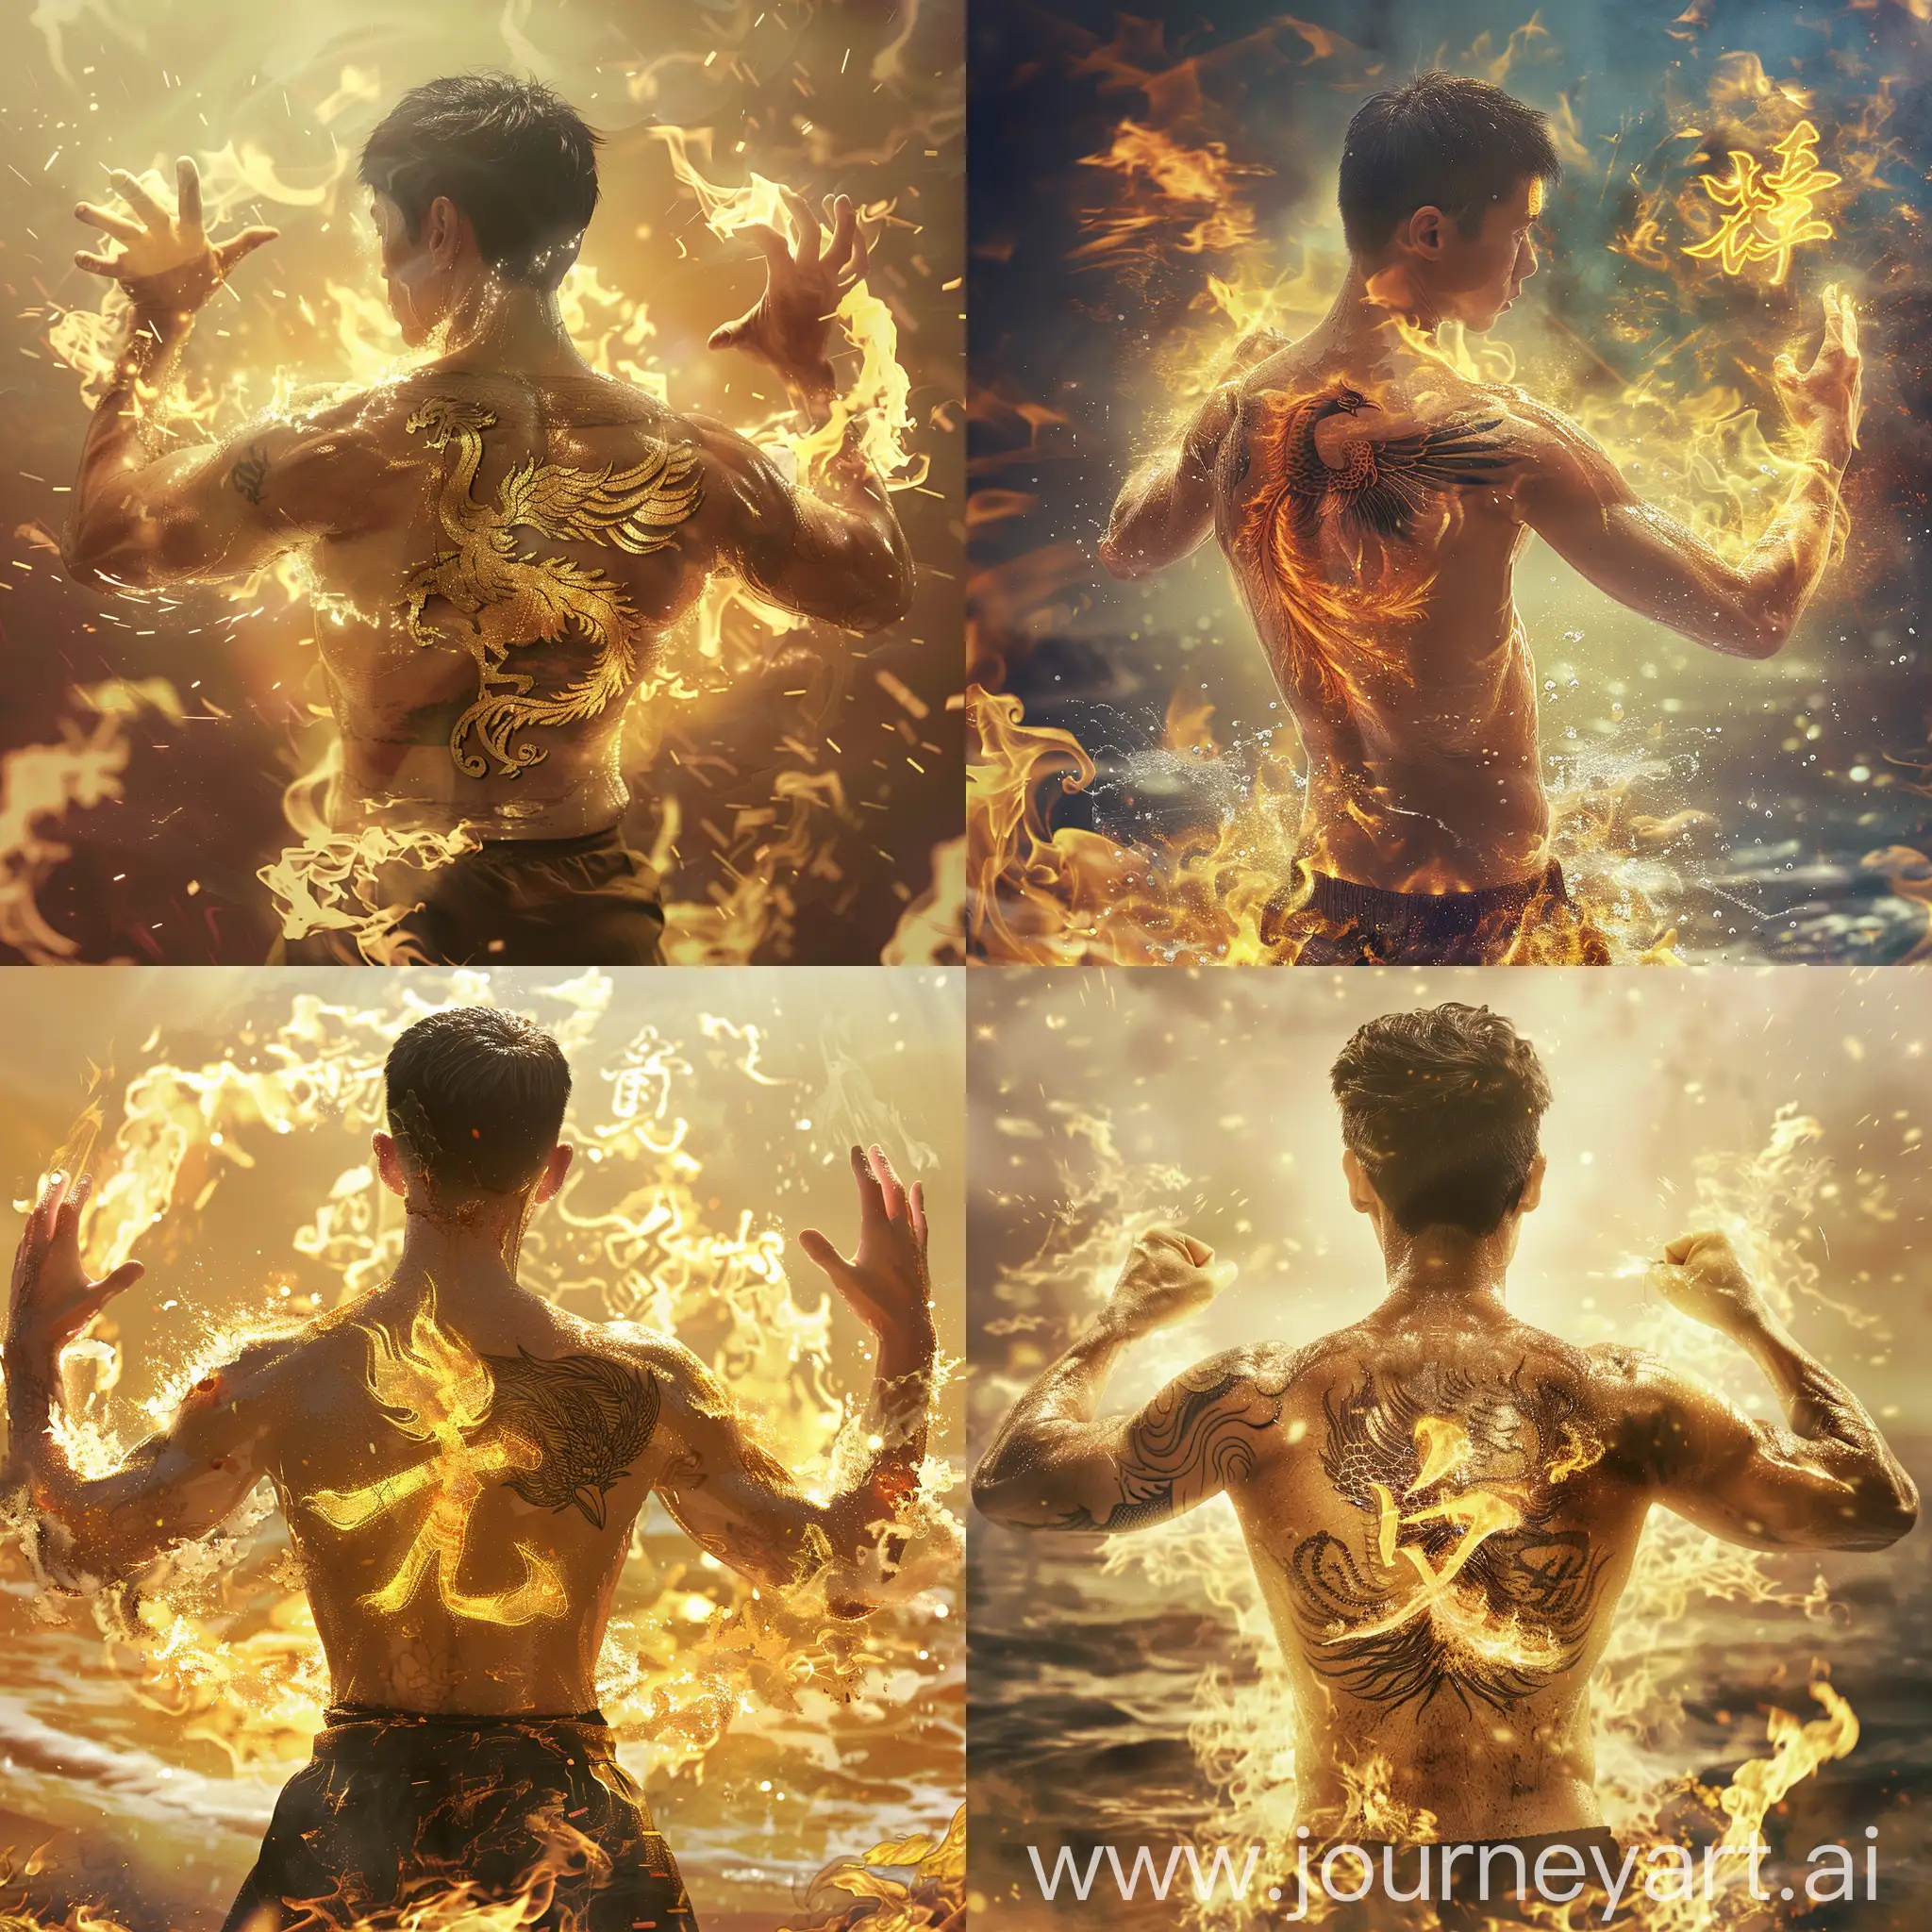 mj6 --prompt "A young Chinese martial artist, his skin glistening with sweat, his muscles rippling beneath his bronze skin. A phoenix tattoo adorns his back. He performs a gravity-defying [action word] in a sea of flames, his body wreathed in a golden light. He raises his hands, and from his palms bursts a torrent of fire, forming the Chinese character "火" (fire) in the air.". "action, cinematic, high-fantasy" --aspect 1:1 --v 6.0